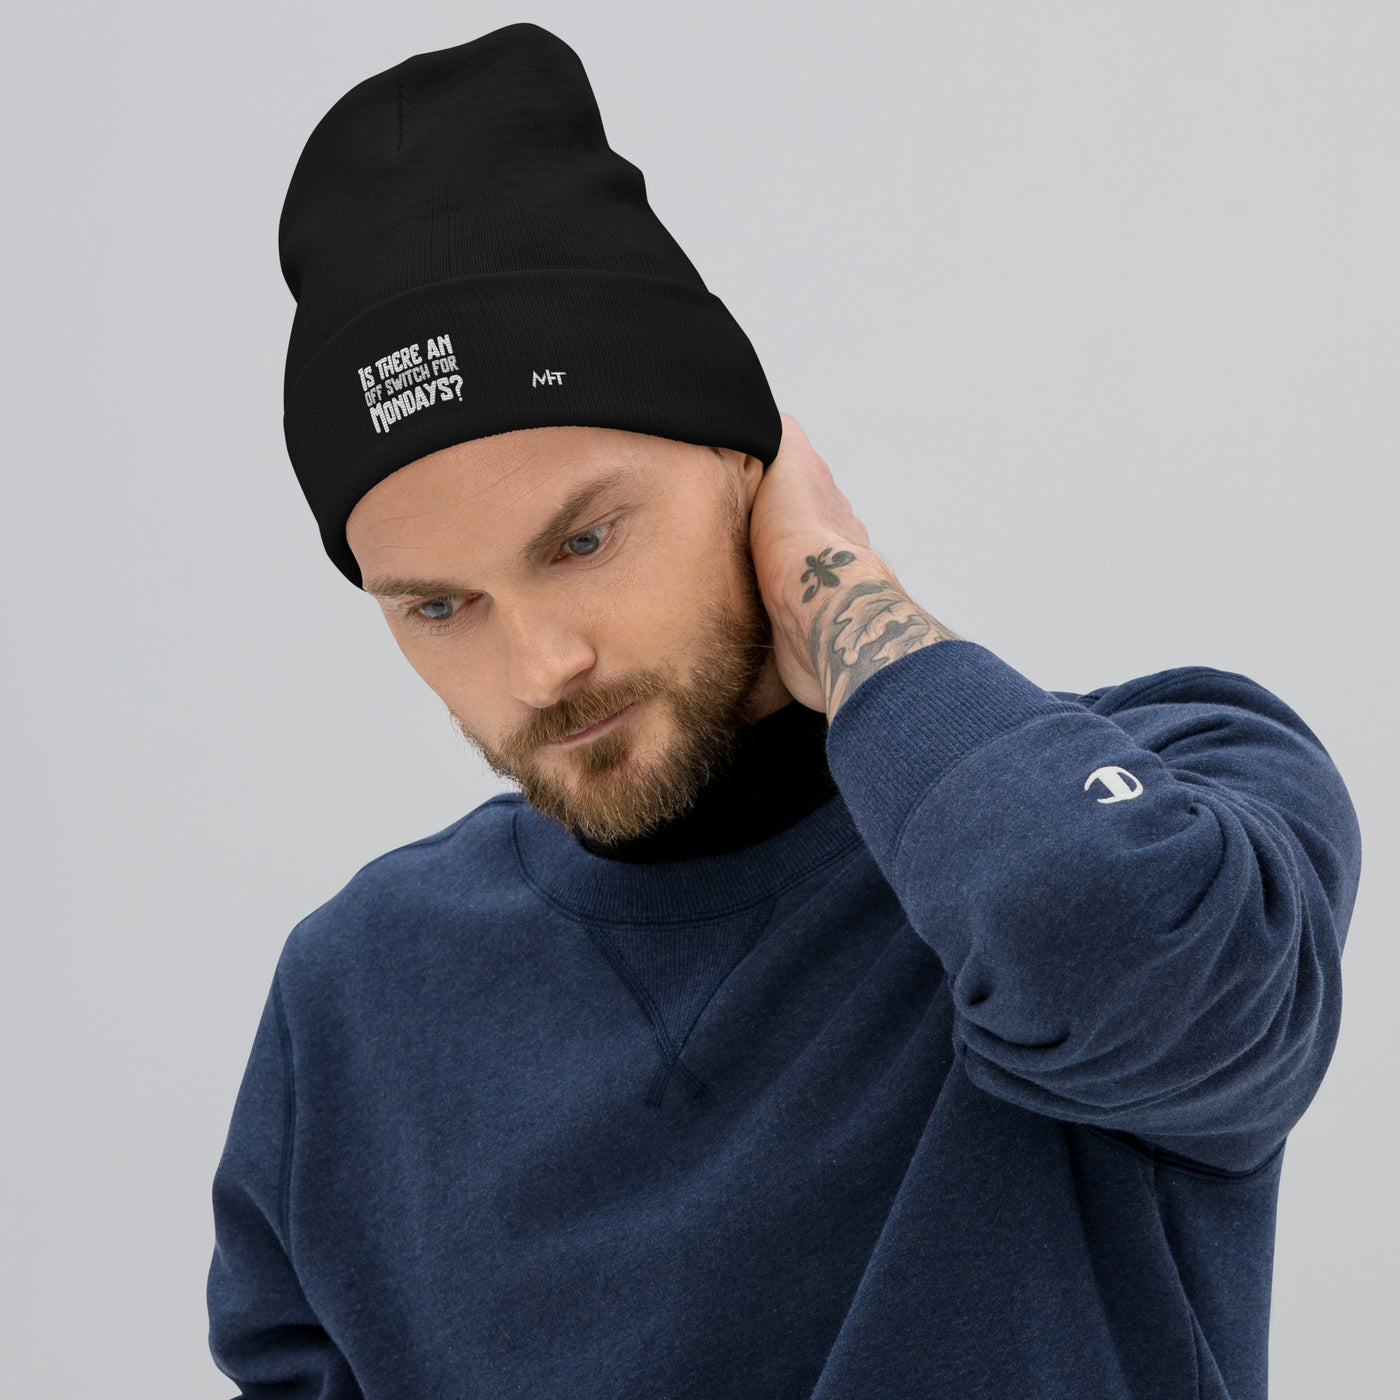 Is there an OFF switch for Mondays? - Embroidered Beanie